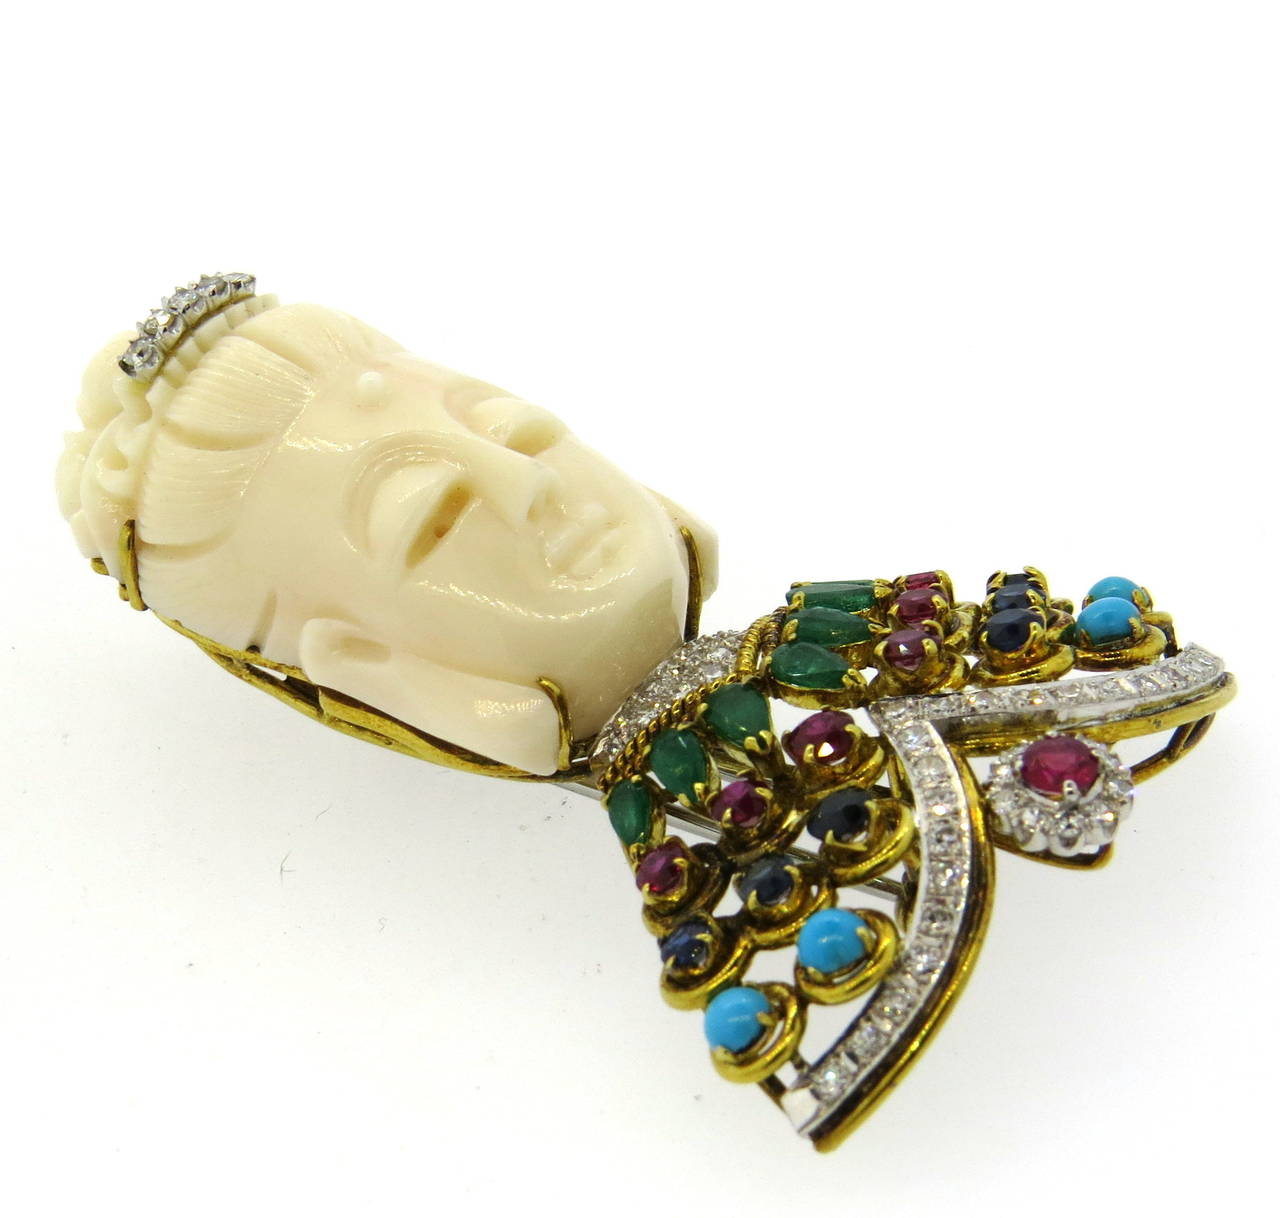 Impressive 18k gold brooch, featuring carved coral, decorated with diamonds, emeralds, sapphires, turquoise and rubies. Brooch measures 66mm x 41mm. Weight of the piece 41.2 grams